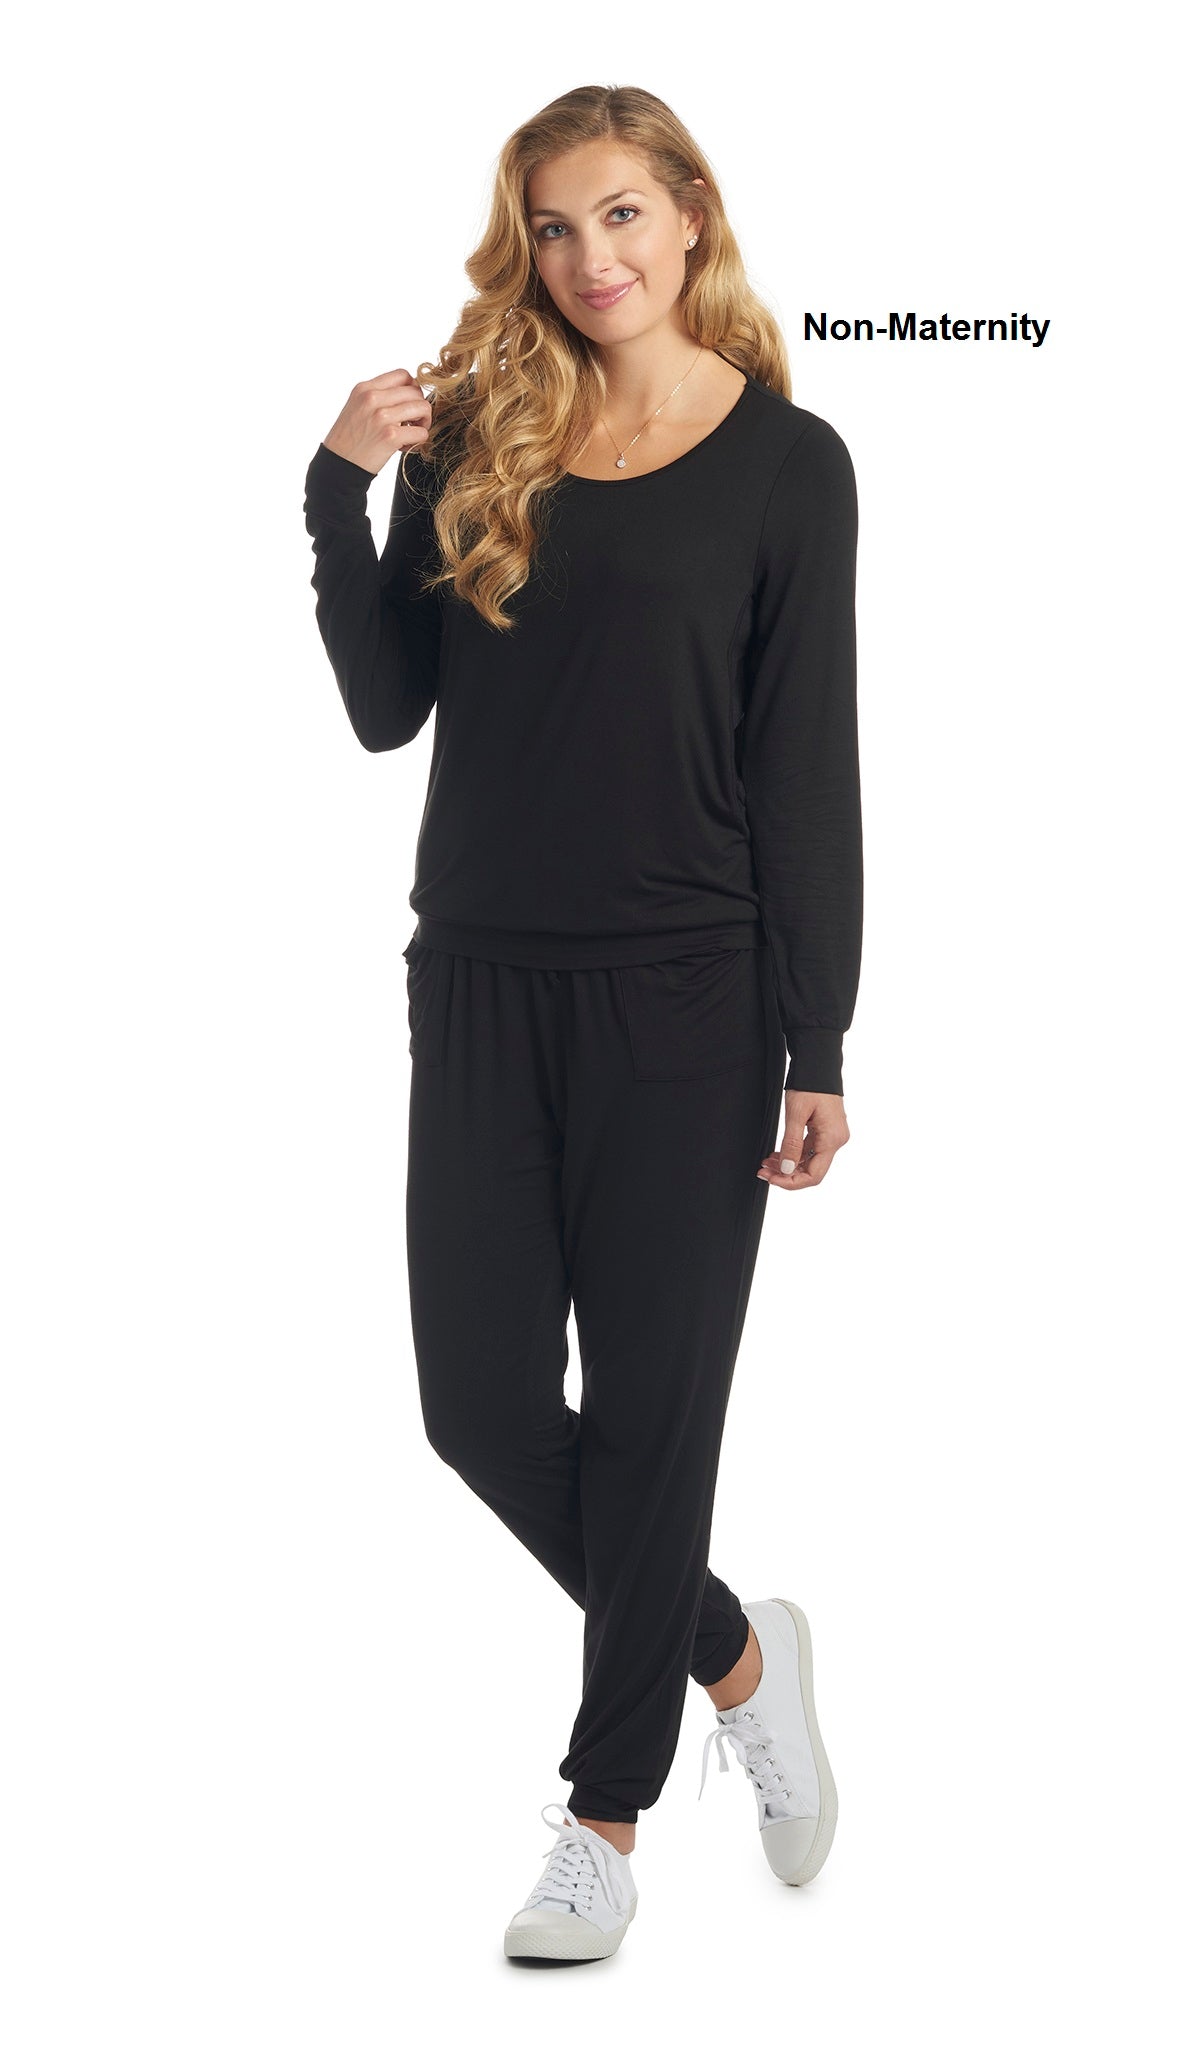 Black Whitney 2-Piece on woman wearing as non-maternity. Long sleeve top with nursing access on sides and long pant with cuff.